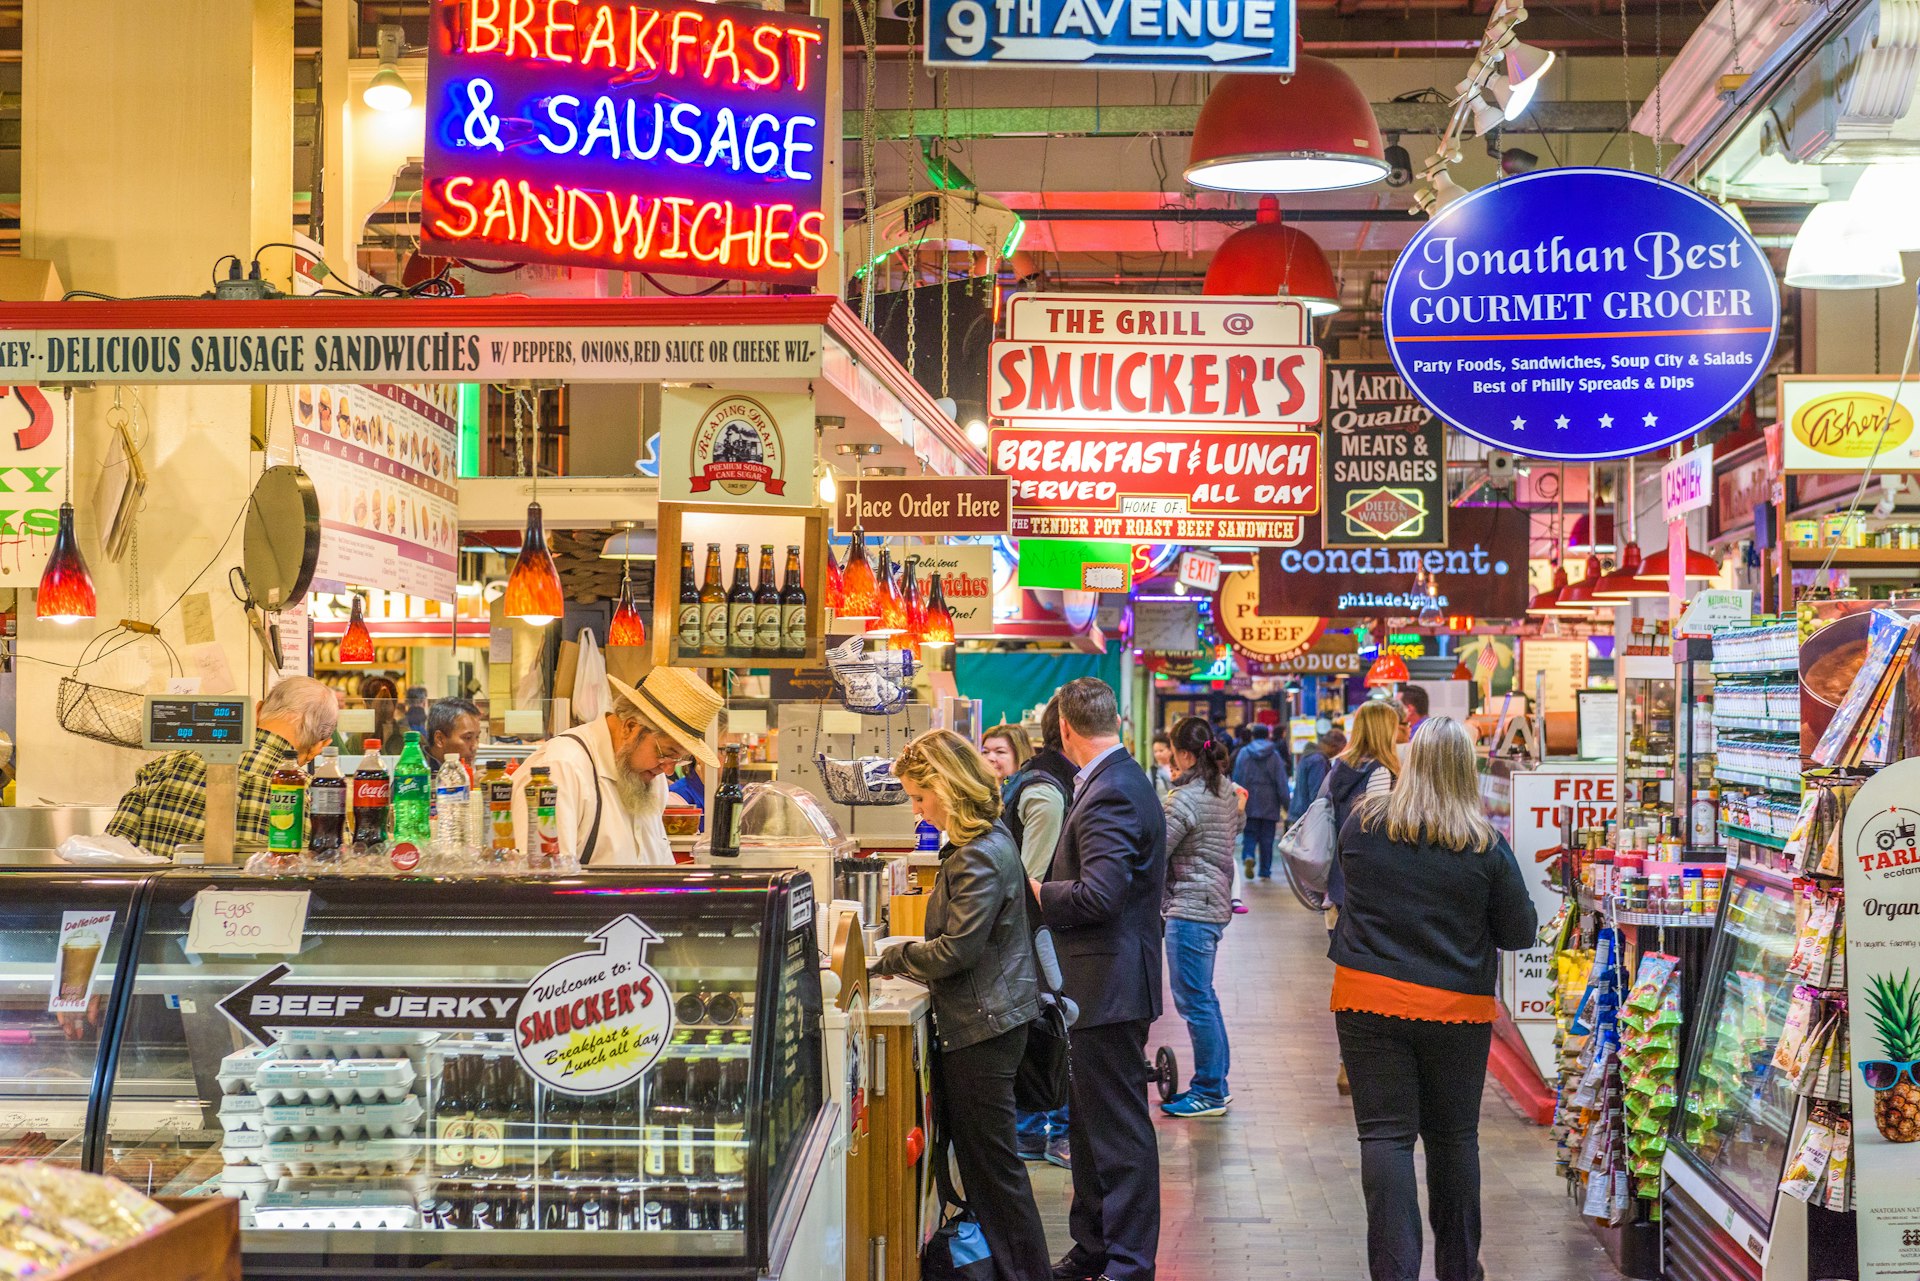 Customers shopping at Reading Terminal Market. There are large signs hanging from the ceiling. 